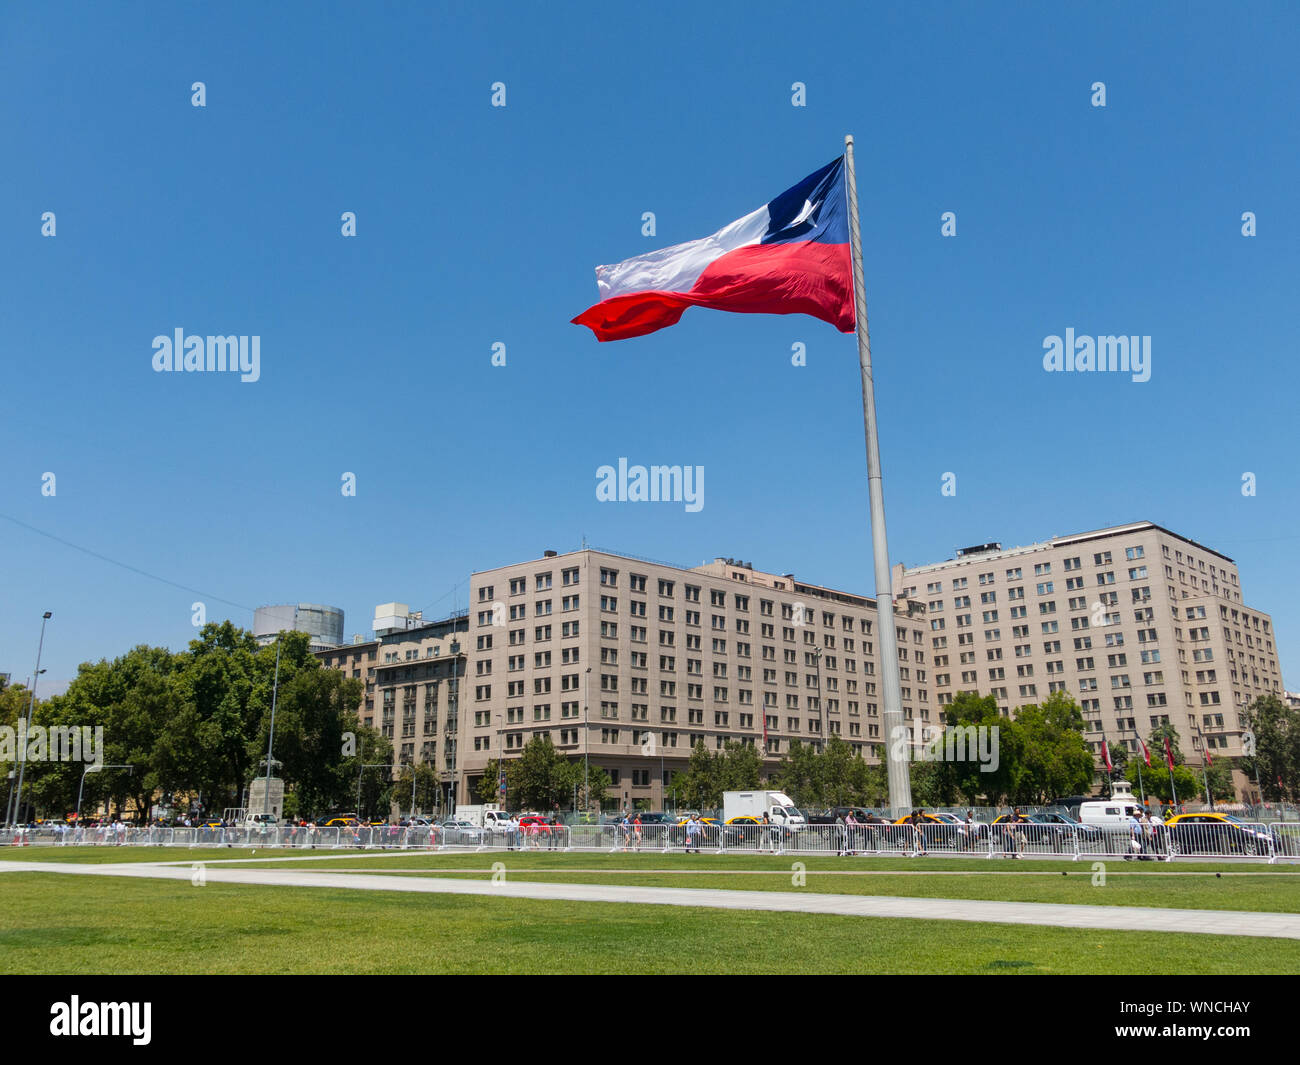 SANTIAGO DE CHILE, CHILE - JANUARY 26, 2018: Chileans walking near the giant flag on Avenida La Alameda with the citizenship Square, in downtown Santi Stock Photo